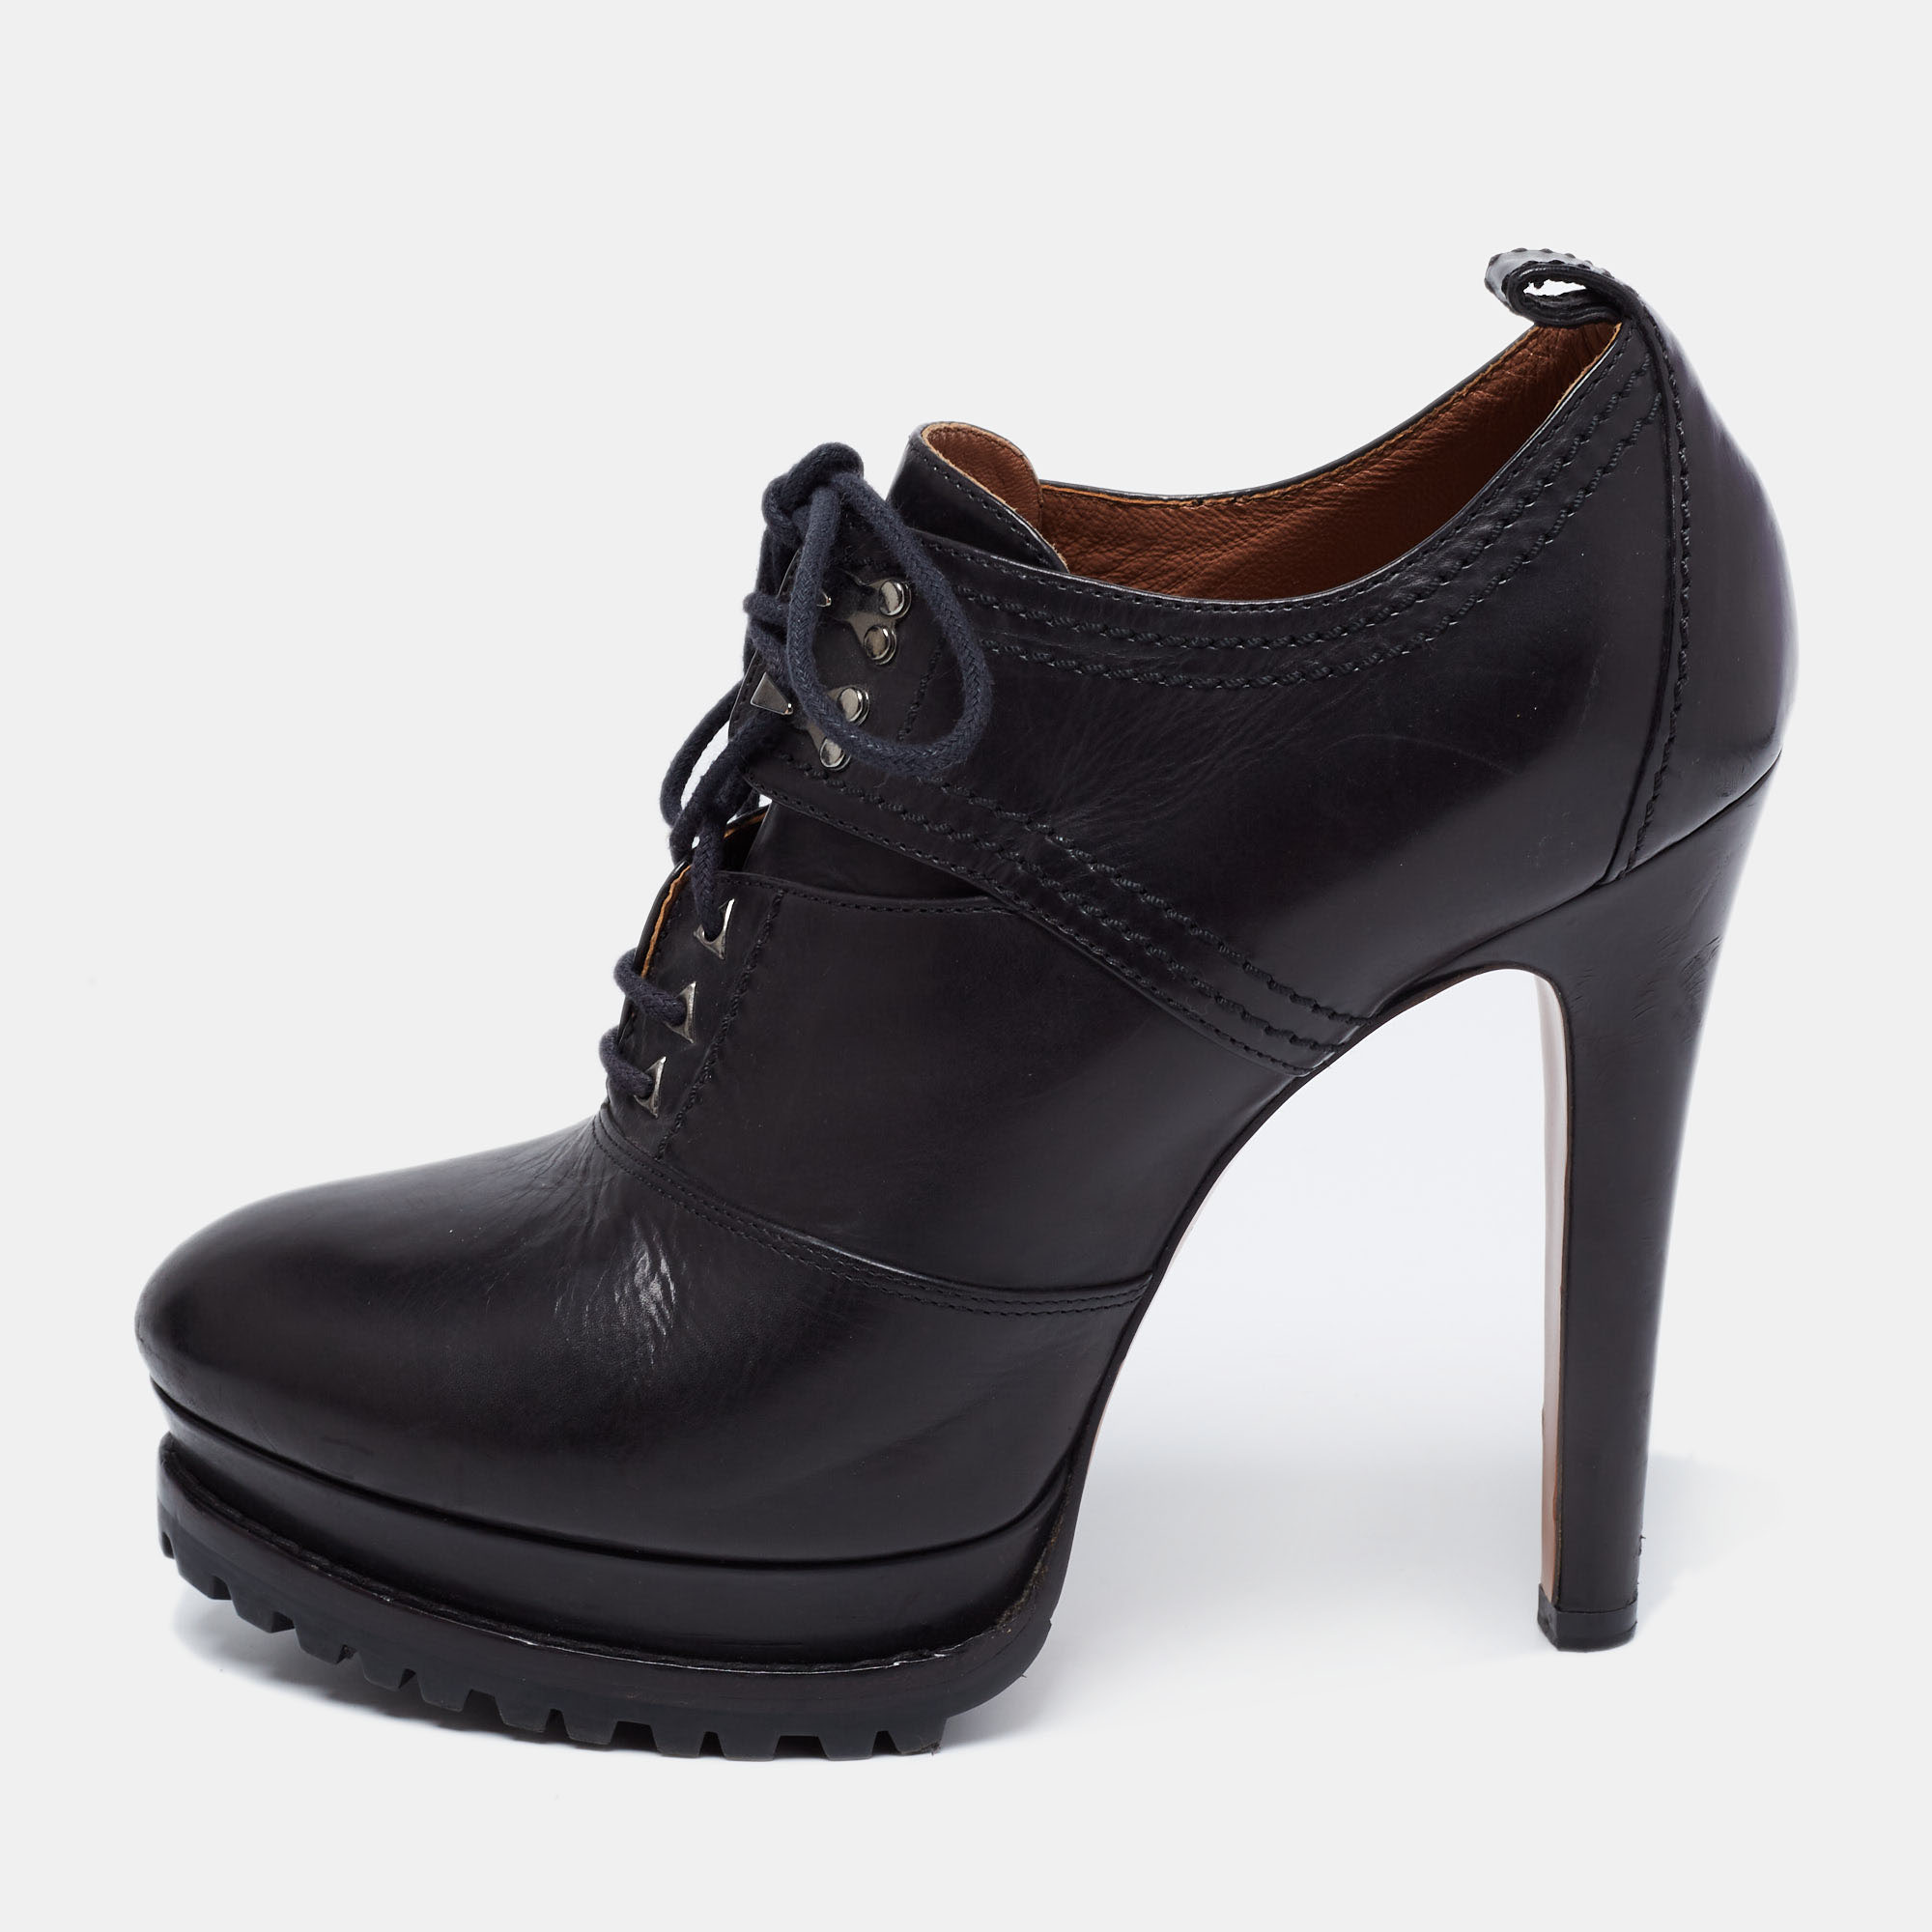 Crafted with perfection these Alaia booties will lend you a sophisticated style statement. The lace up vamps and a pull tab at the counter form the leather upper of this pair. Elevated on 13cm heels and platforms these shoes will take up your fashion sense to new heights.